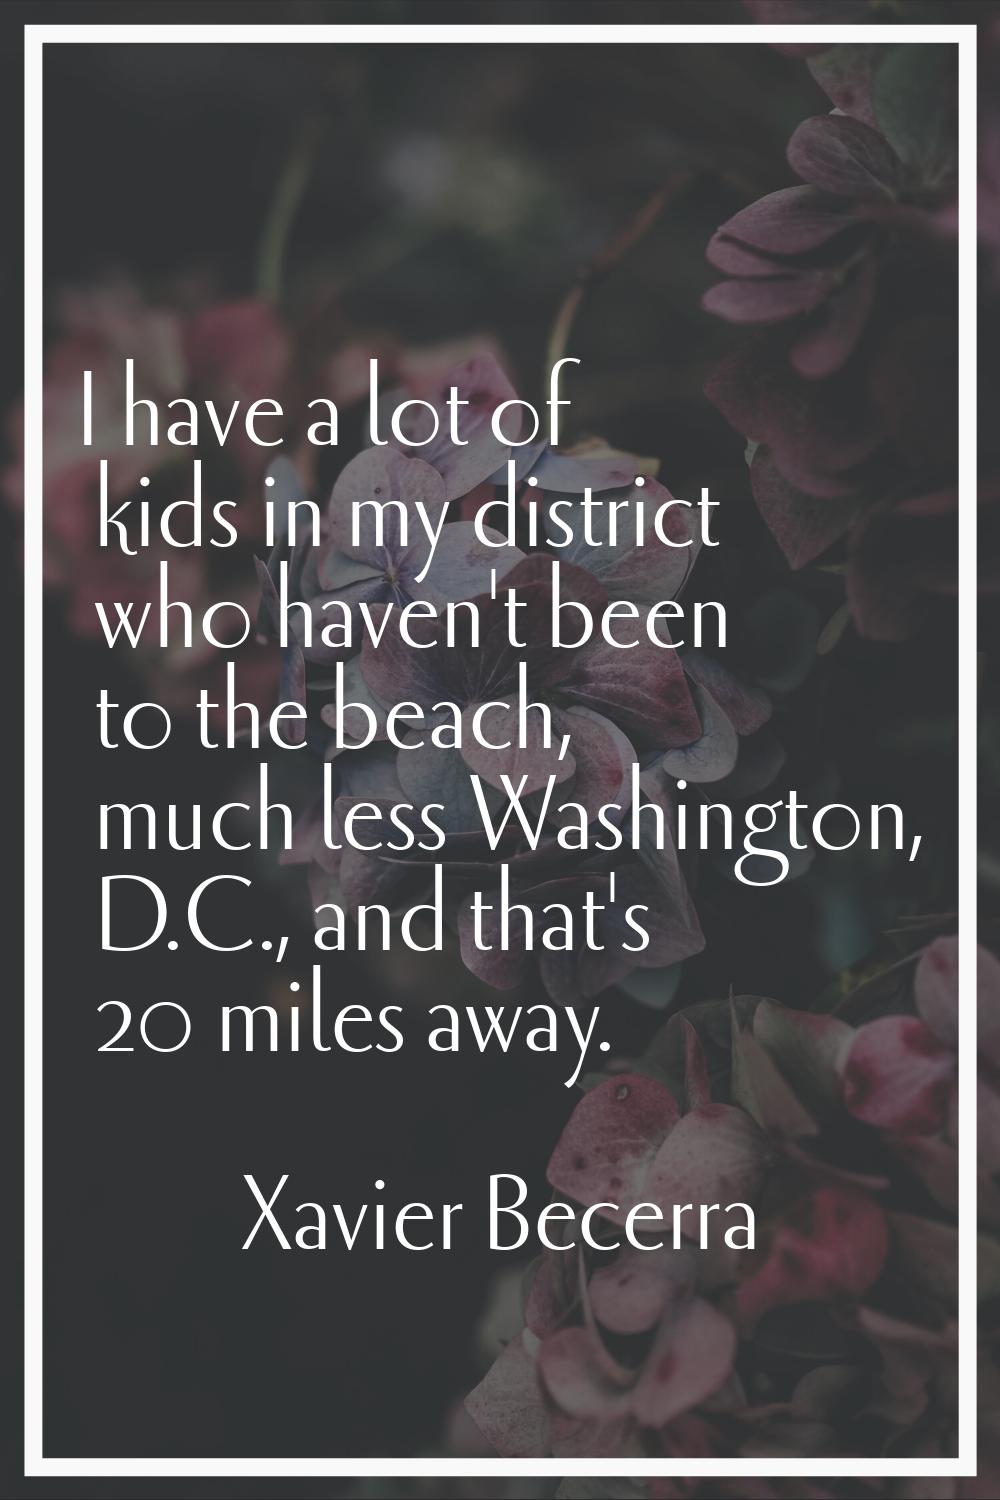 I have a lot of kids in my district who haven't been to the beach, much less Washington, D.C., and 